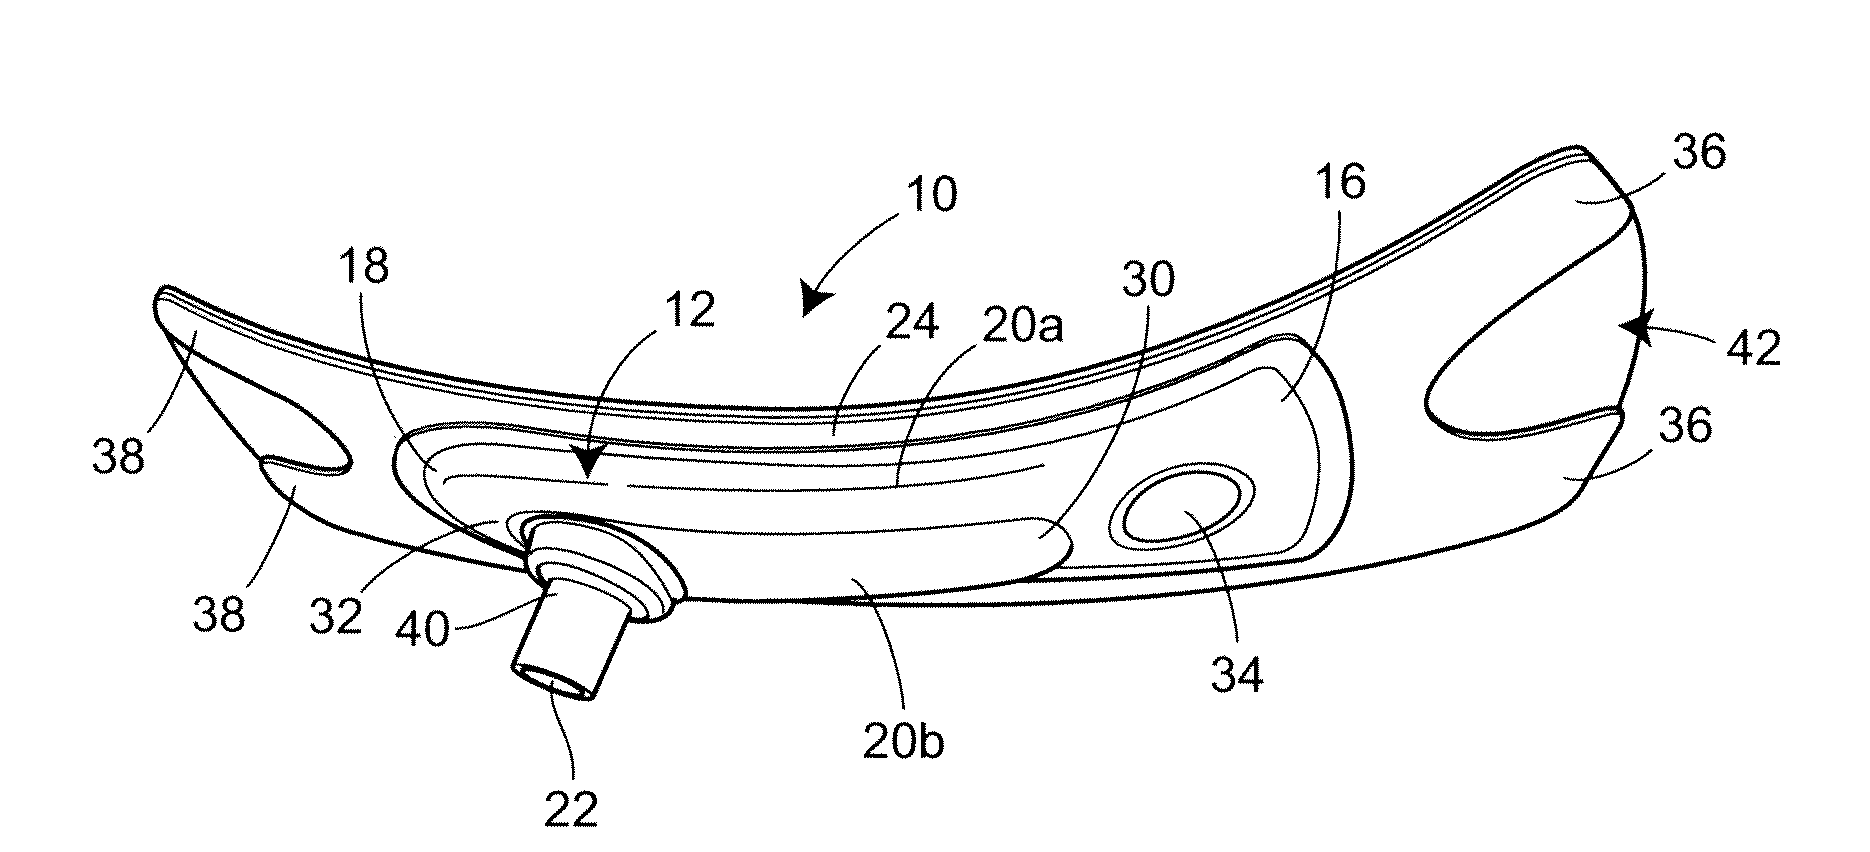 Urinary incontinence device and method